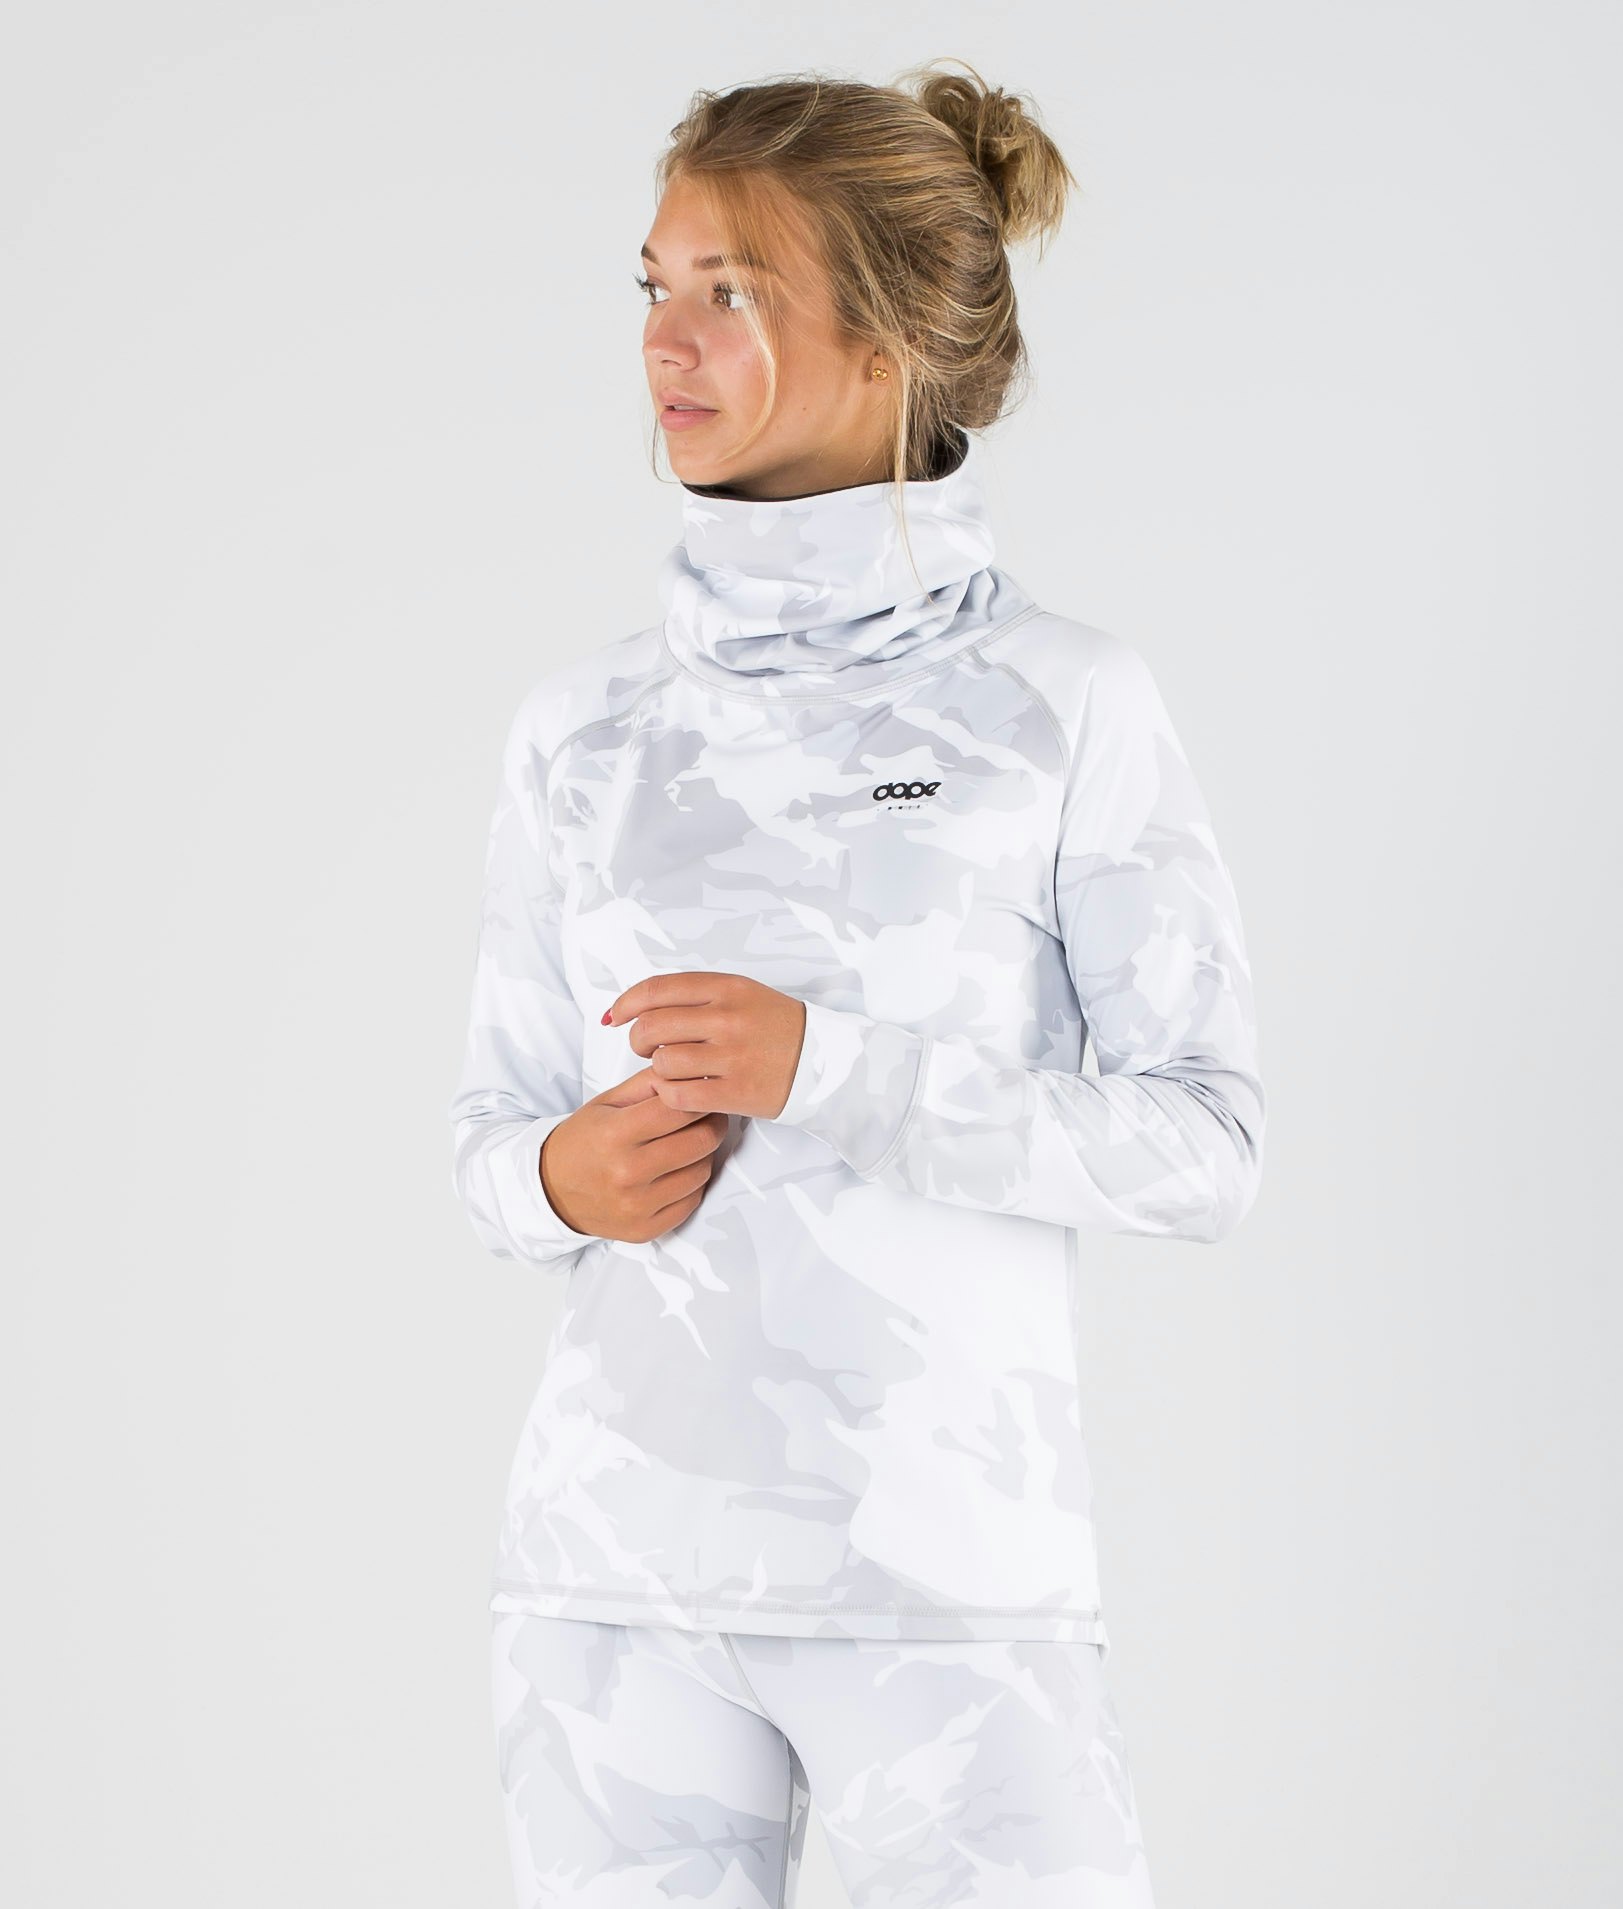 What does a base layer entail for hiking